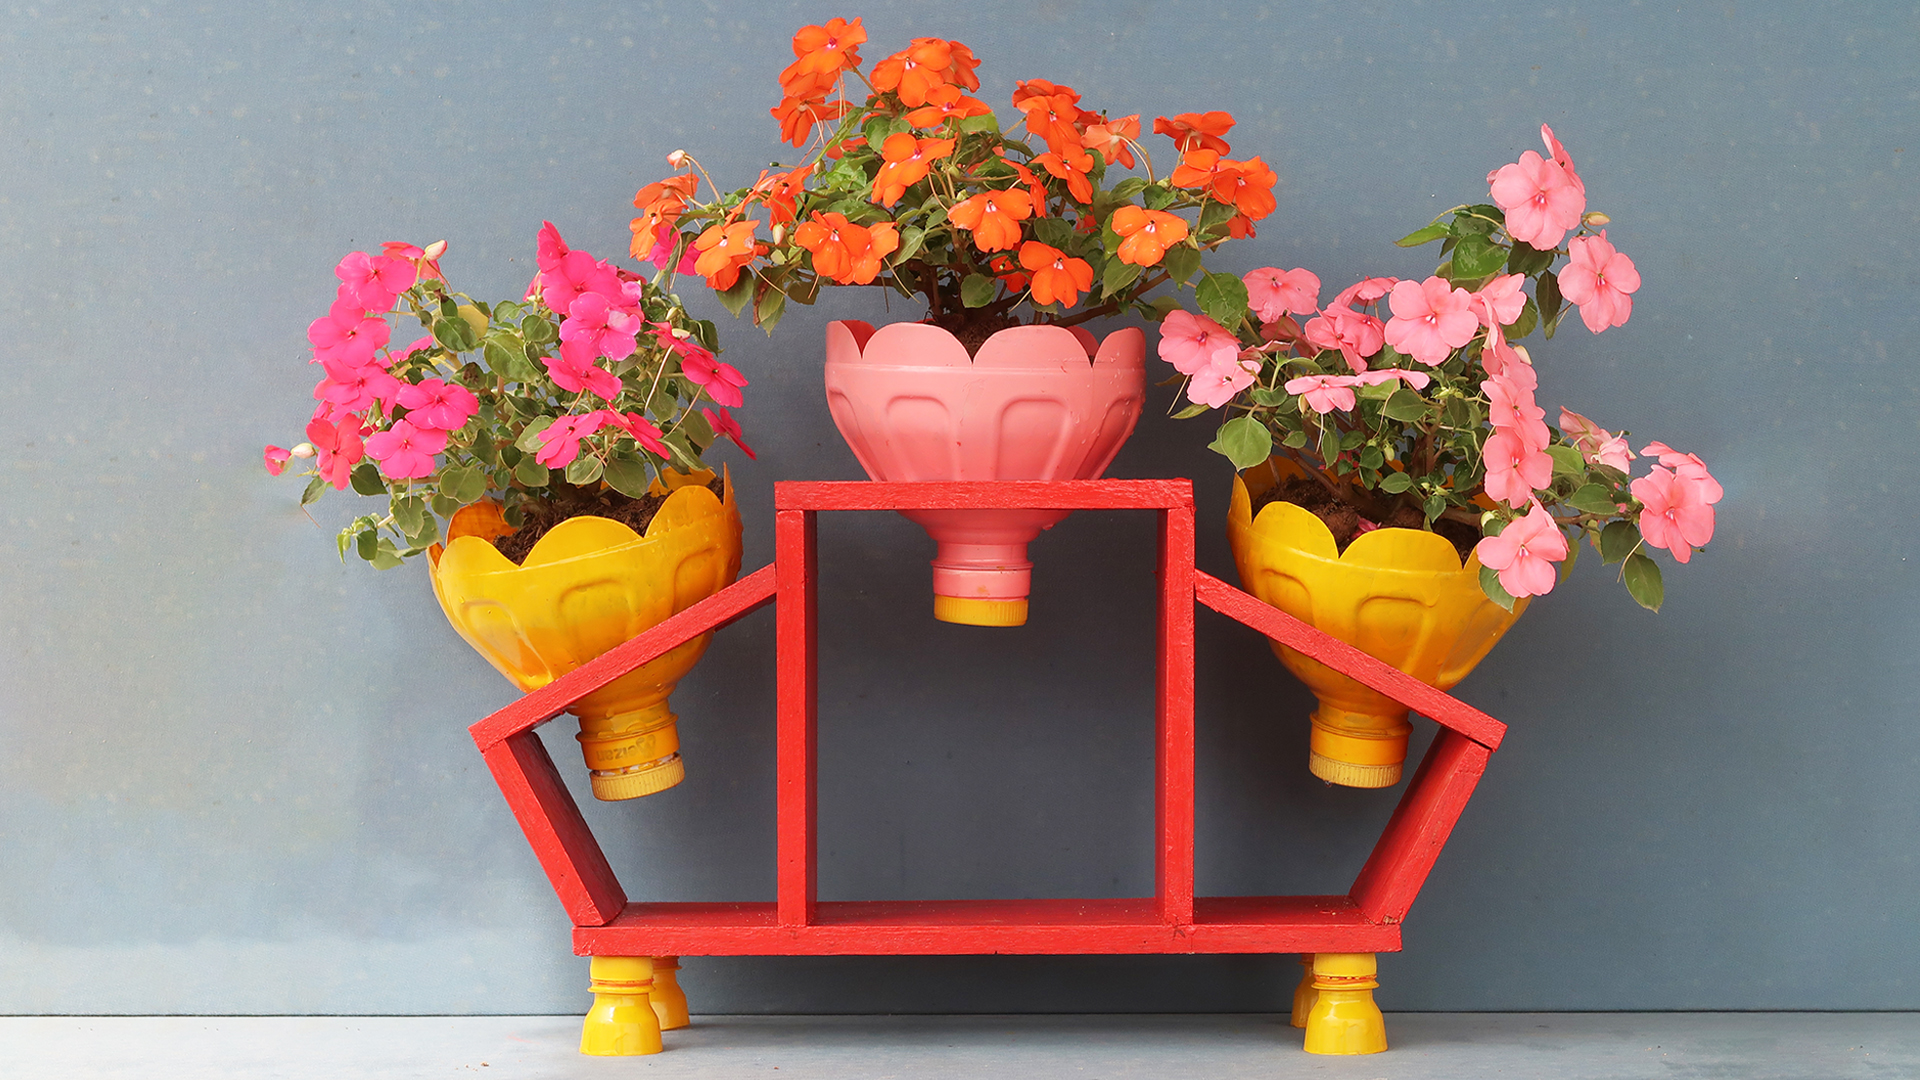 Great Creation For The Garden, Recycle Plastic Bottles To Make Beautiful Flower Pots